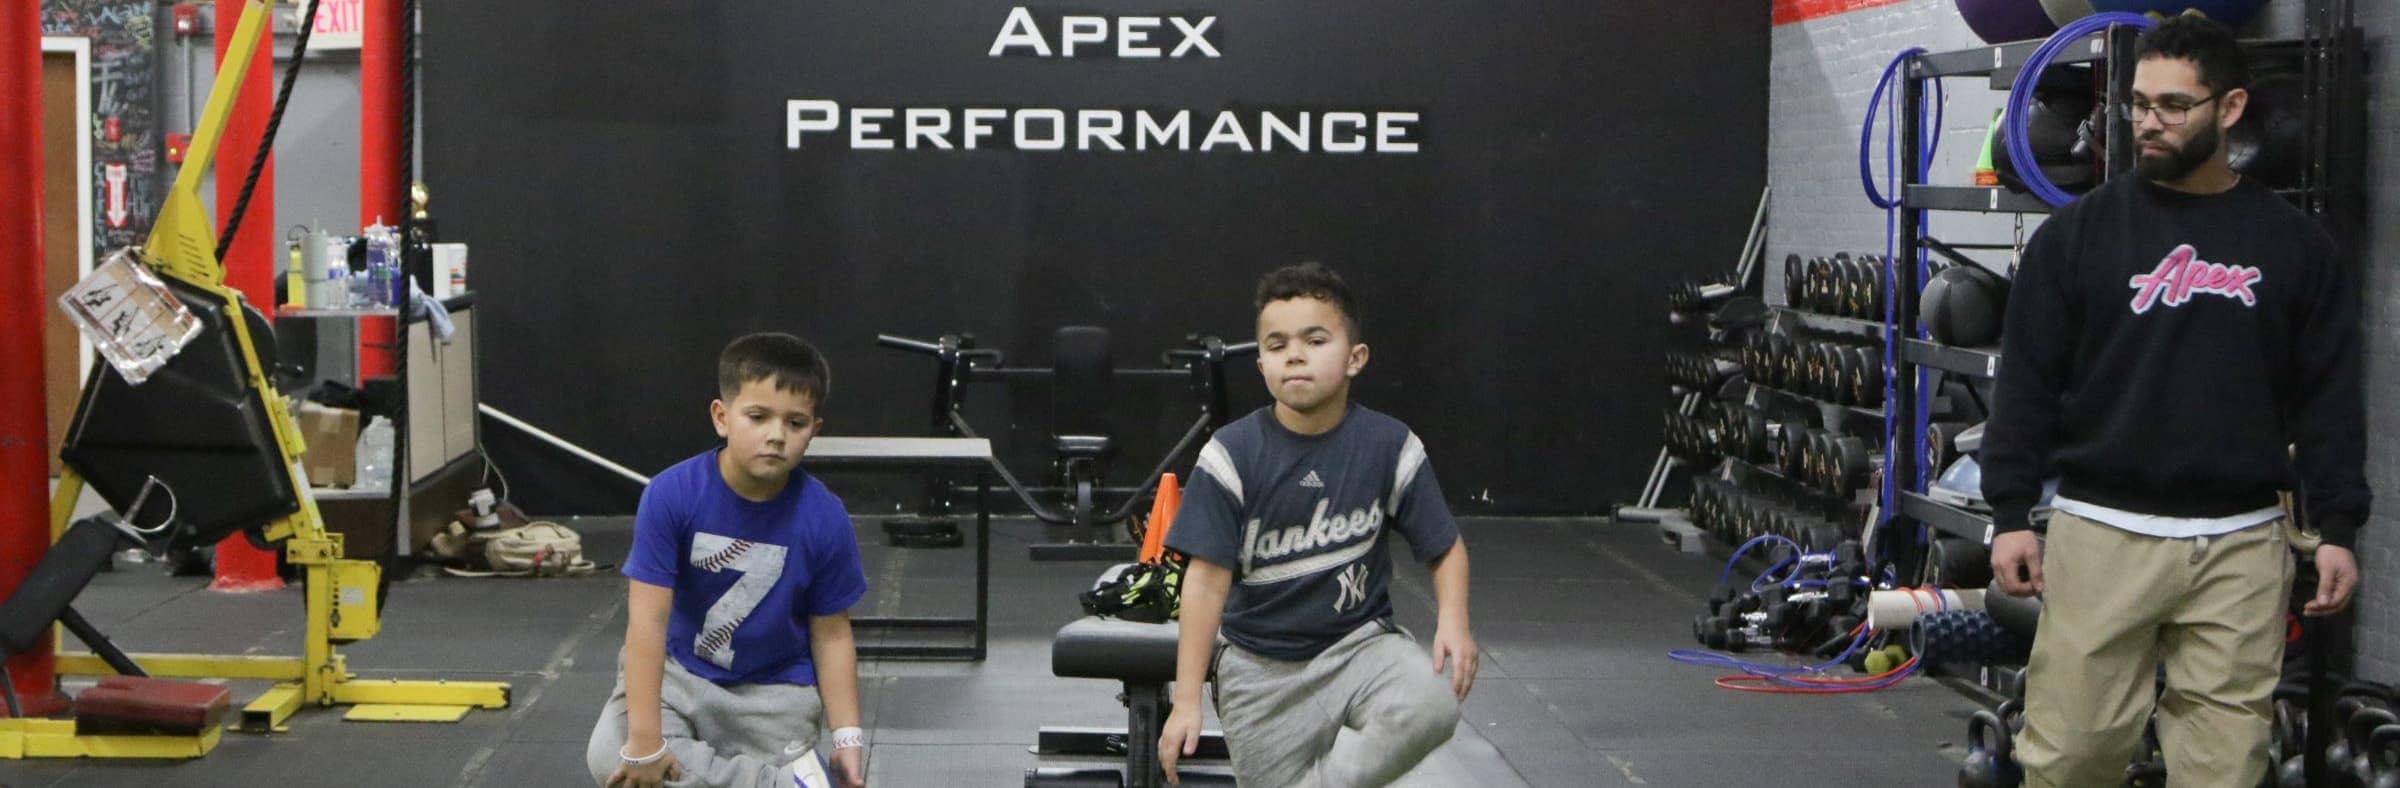 Young athletes at Apex Performance Gym participating in a youth fitness class, with a focus on developing balance and coordination.